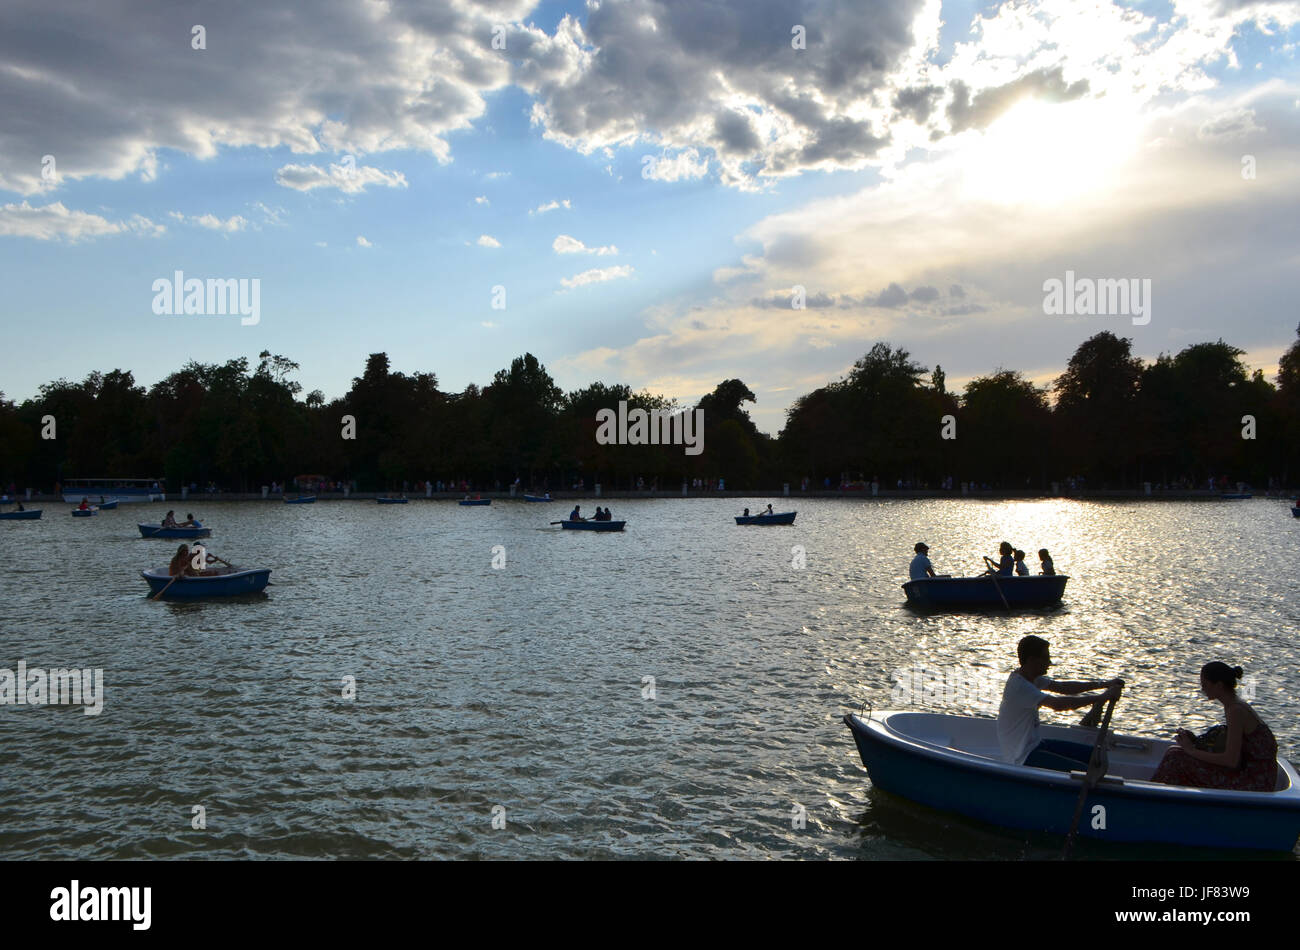 Tourists Boating at The Buen Retiro Park Lake in Madrid, Spain Stock Photo